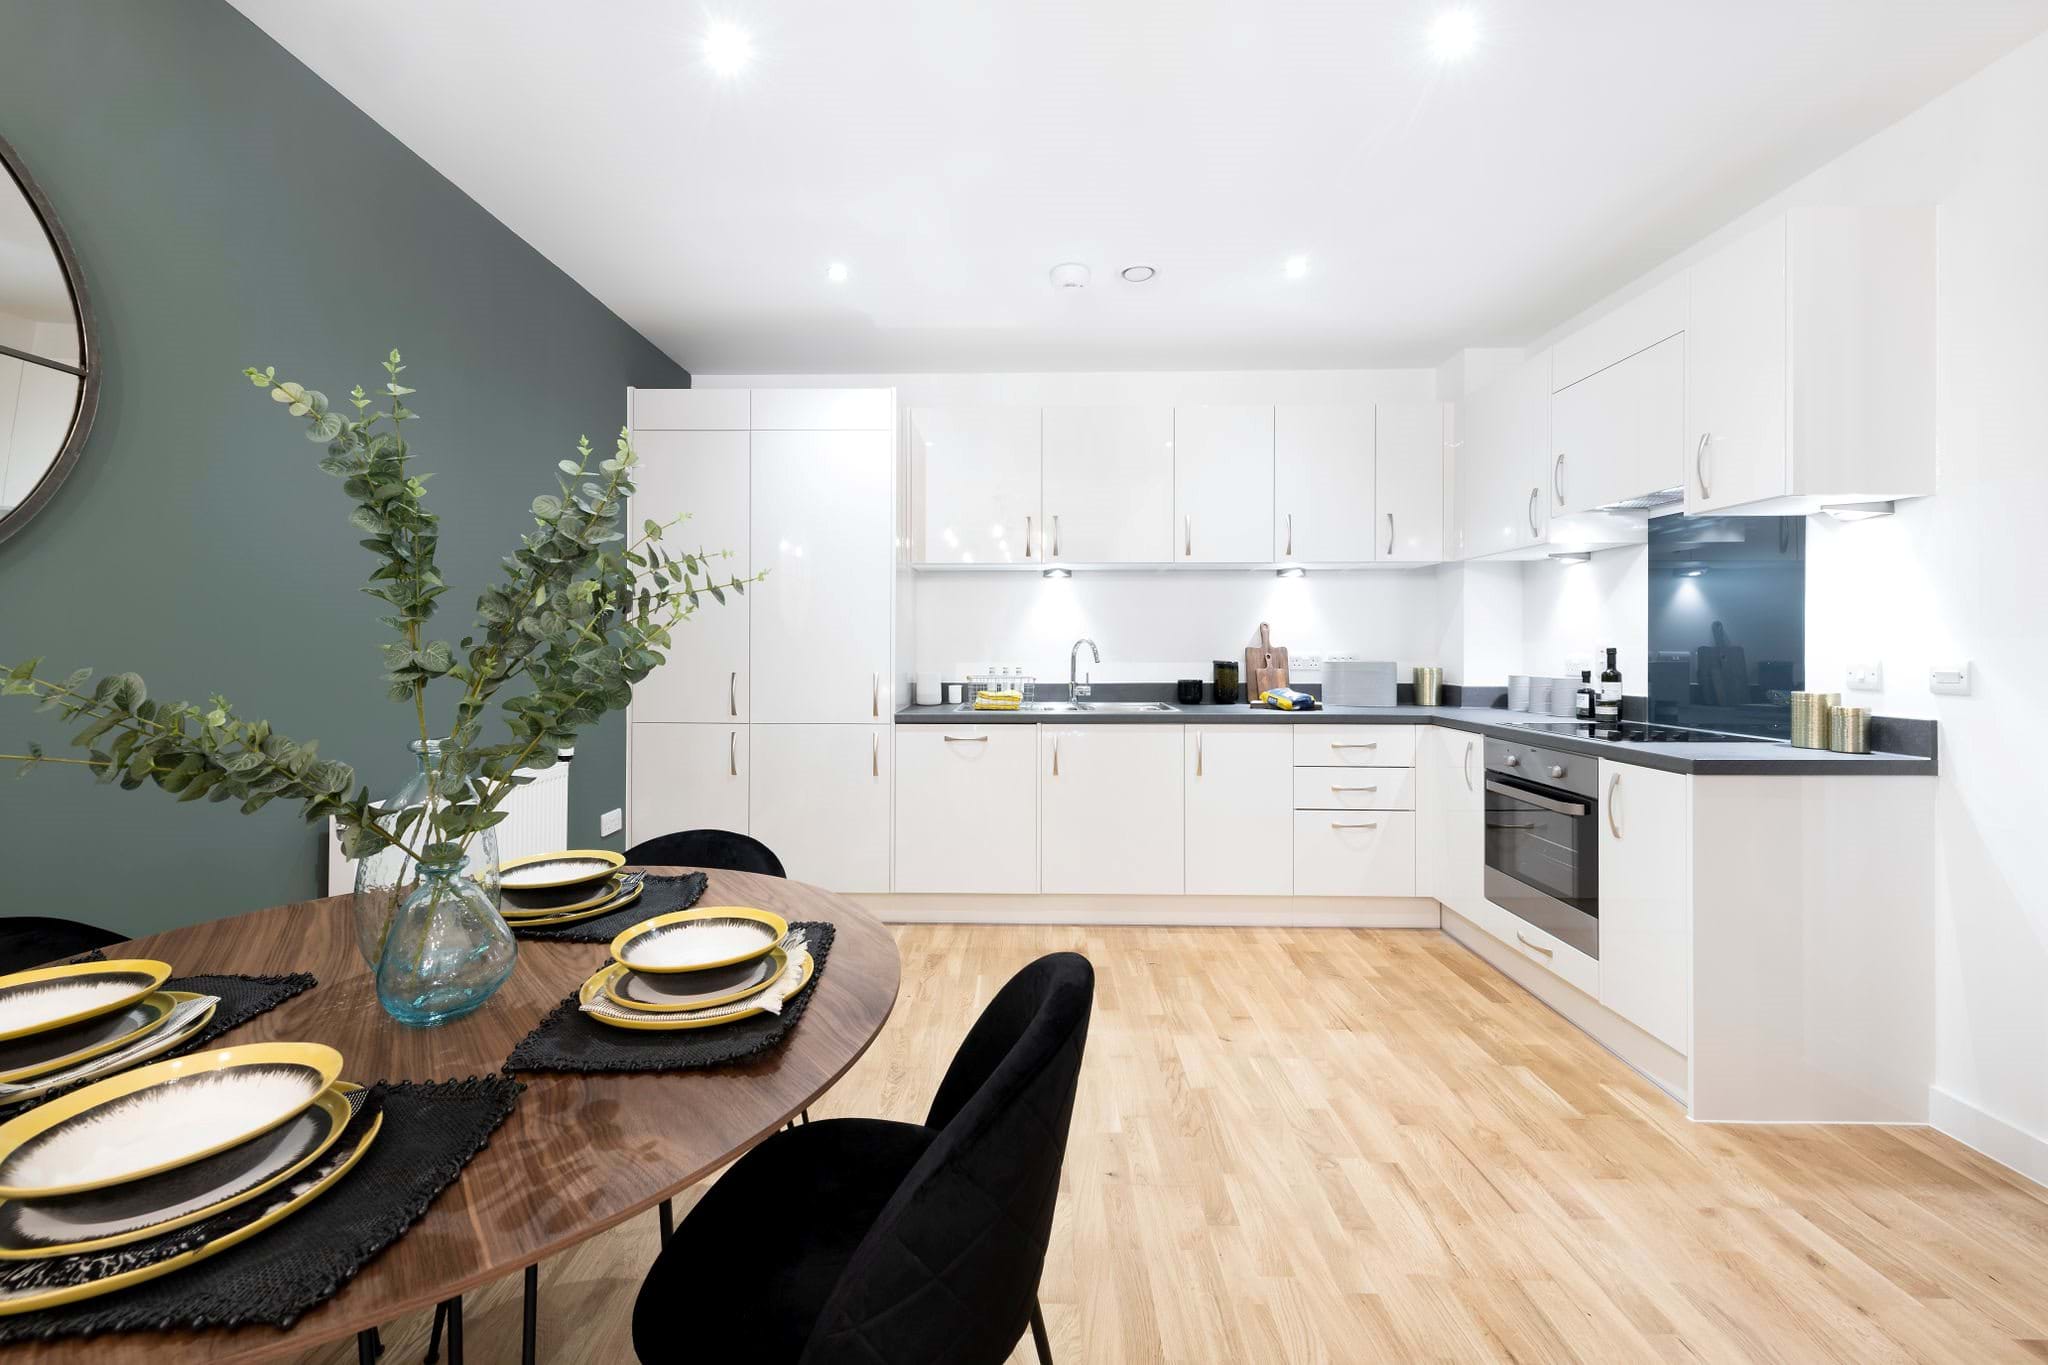 Most kitchens in new build homes are pretty stylish and modern